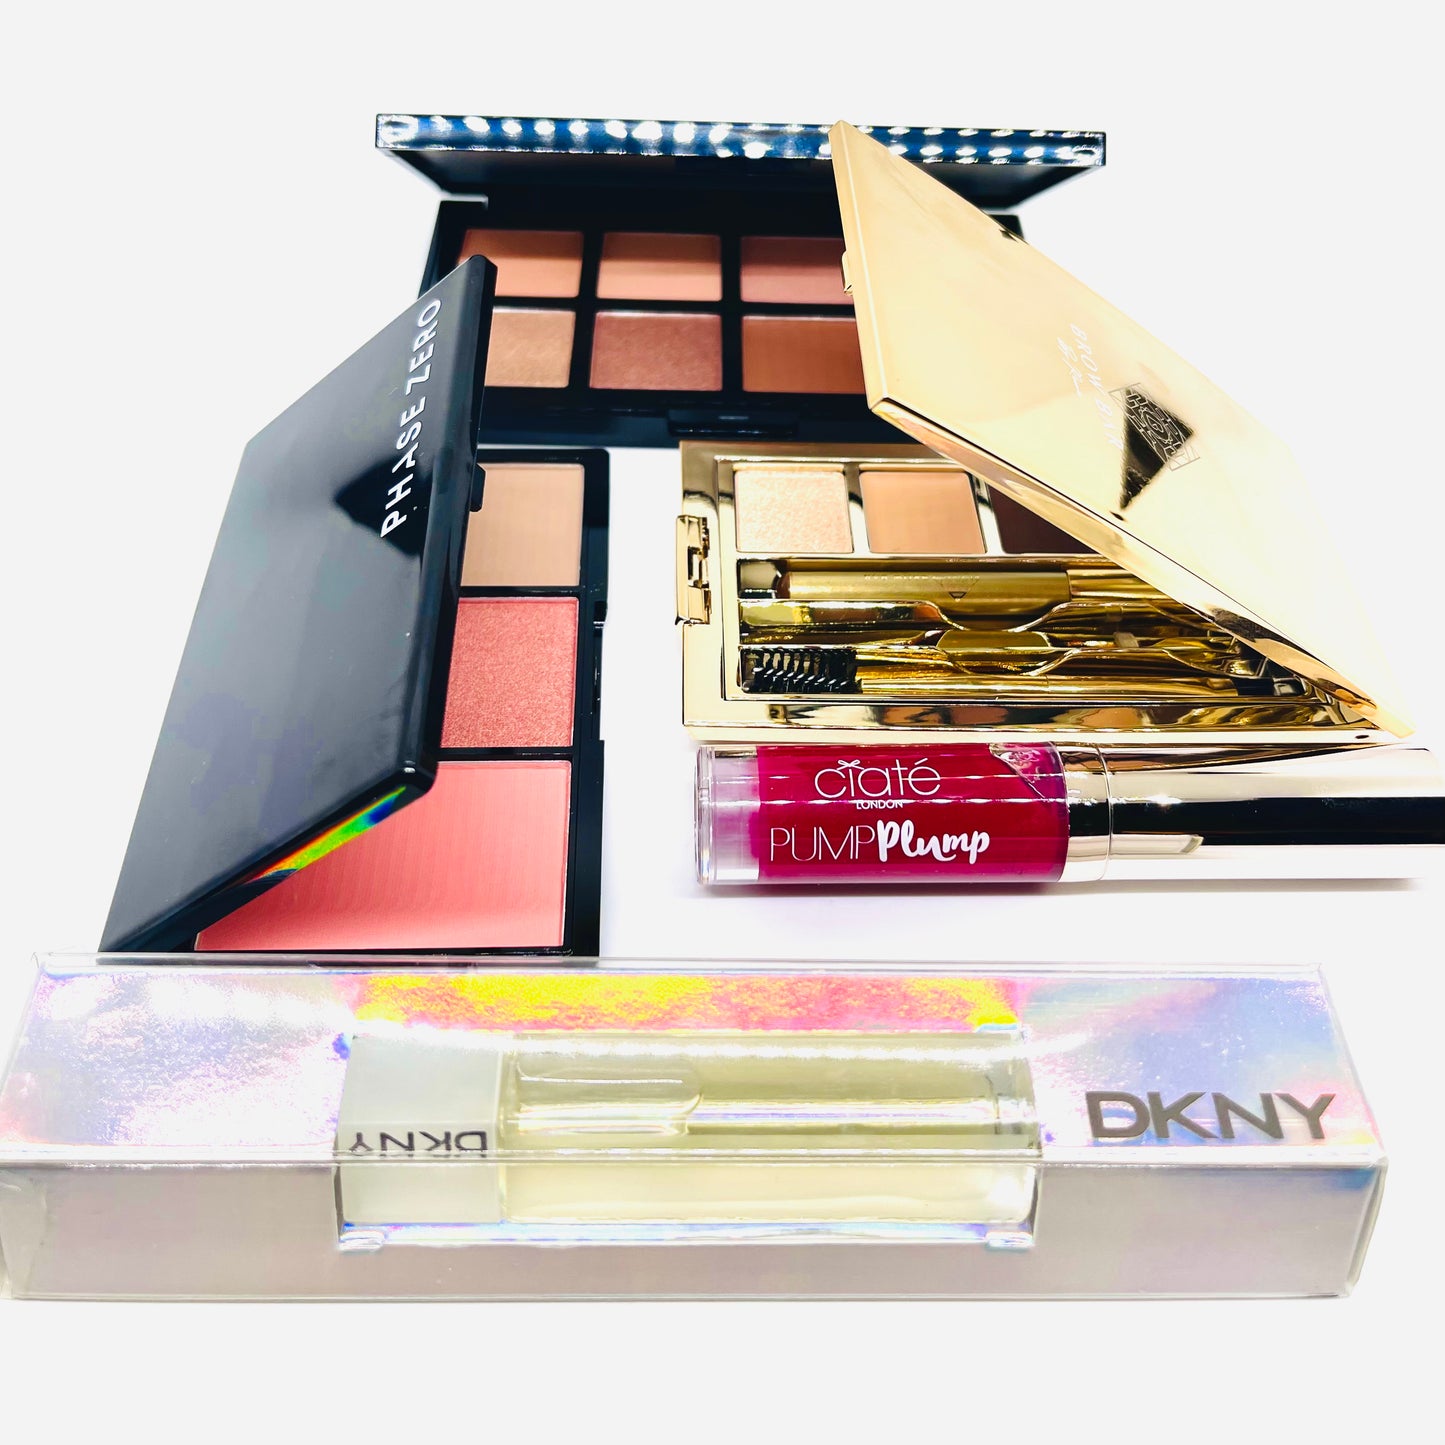 March 2023 Limited Edition Ultimate Glam Beauty Makeup Box